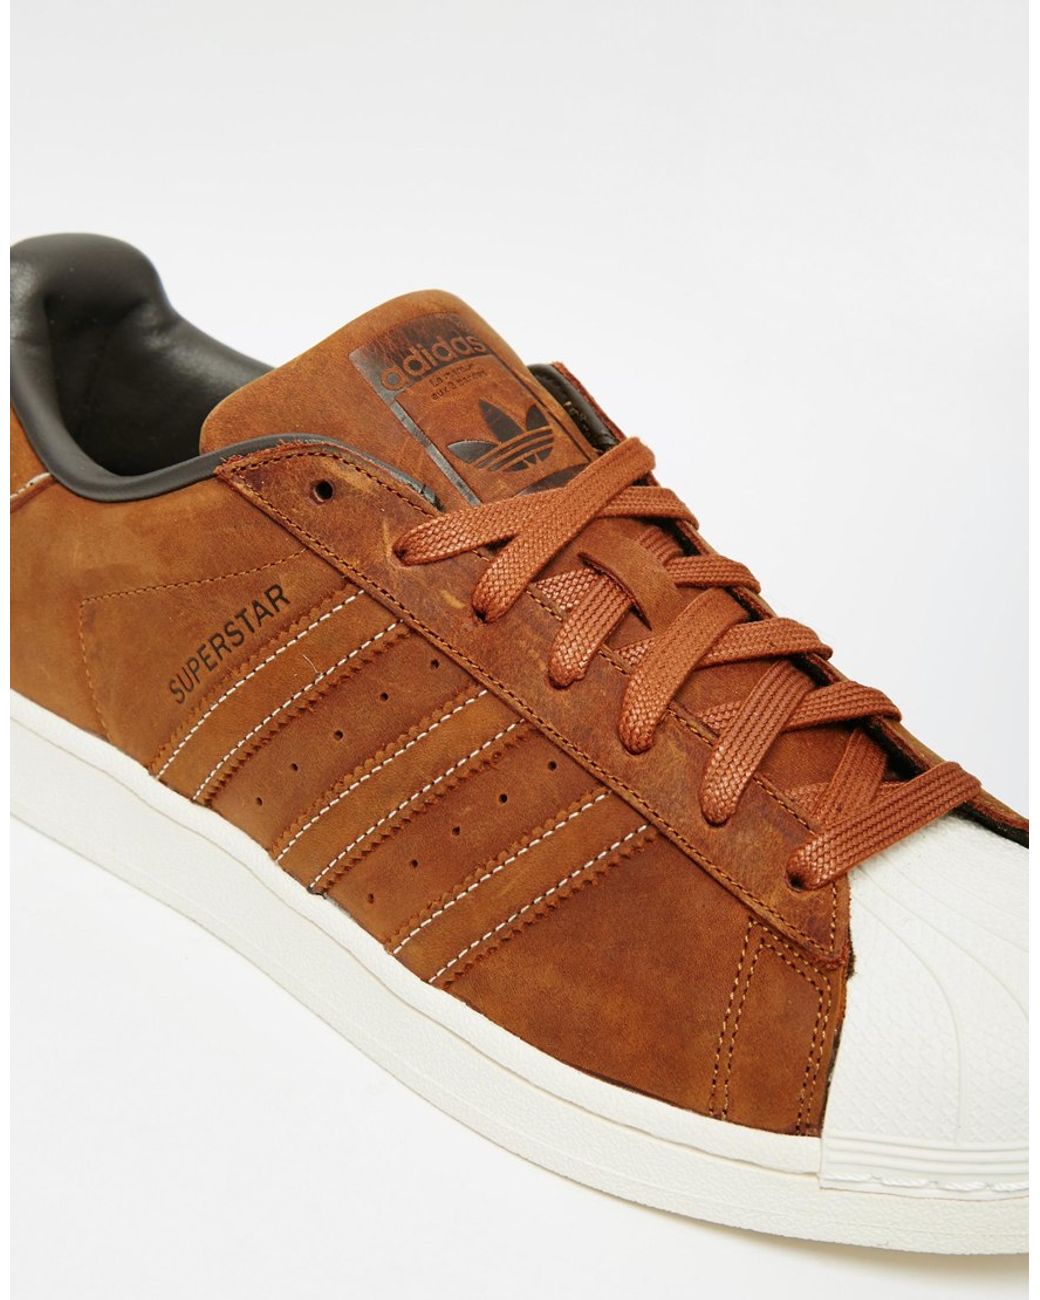 Are Adidas Superstar Leather Sneakers Reliable